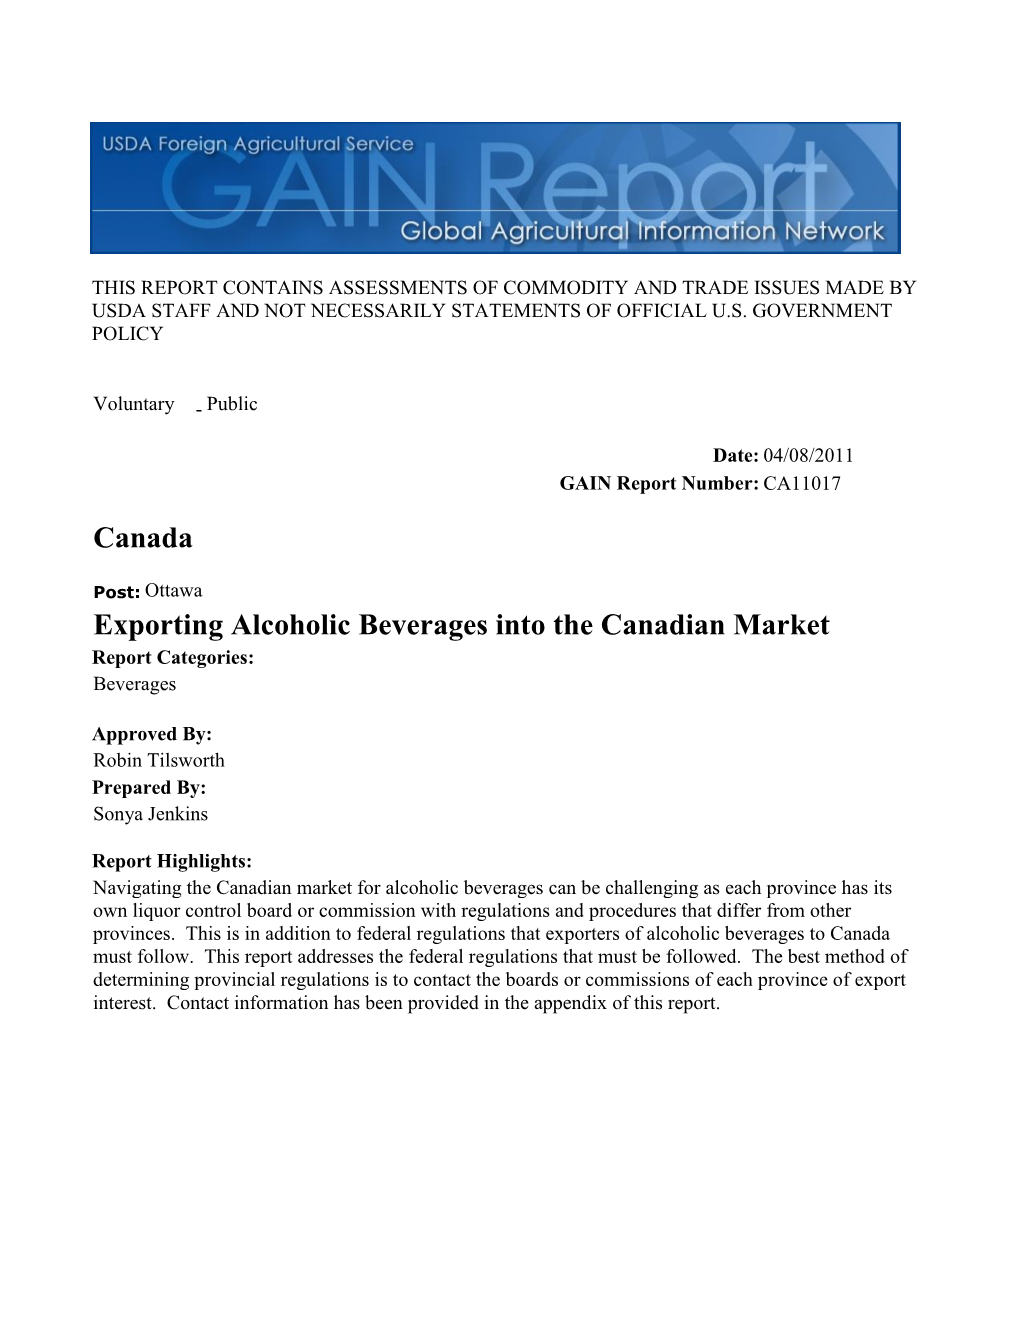 Exporting Alcoholic Beverages Into the Canadian Market Canada